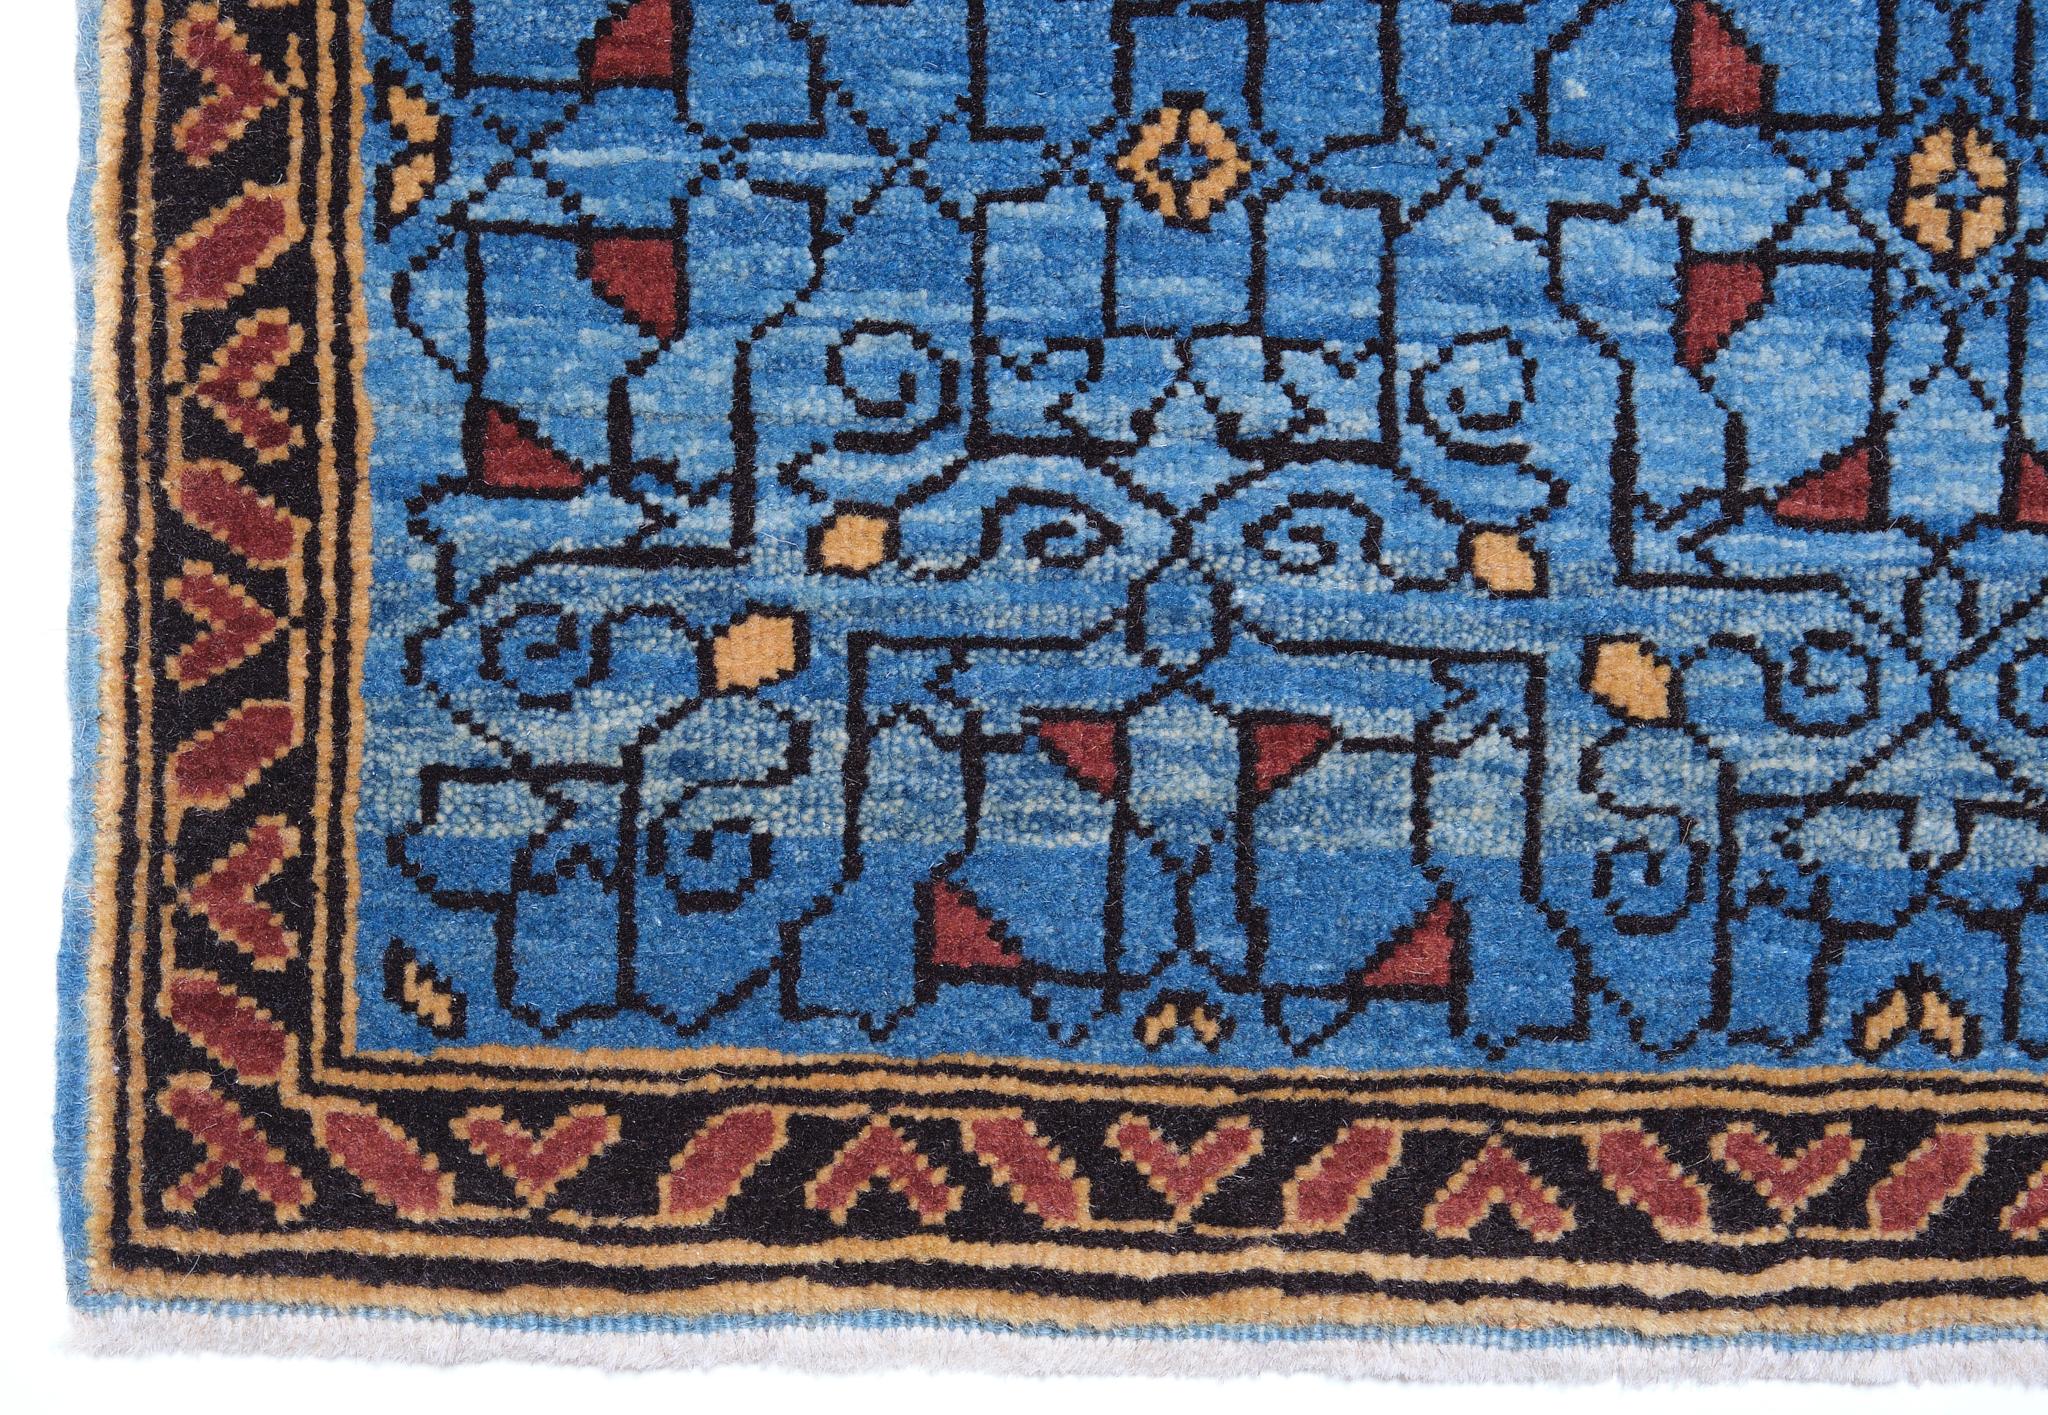 The source of the rug comes from the possession of Endre Unger, which was sold at Sotheby’s in 1992. That rug with the central star was designed in the early 16th-century rug by Mamluk Sultane of Cairo, Egypt. The interpreted design is composed of